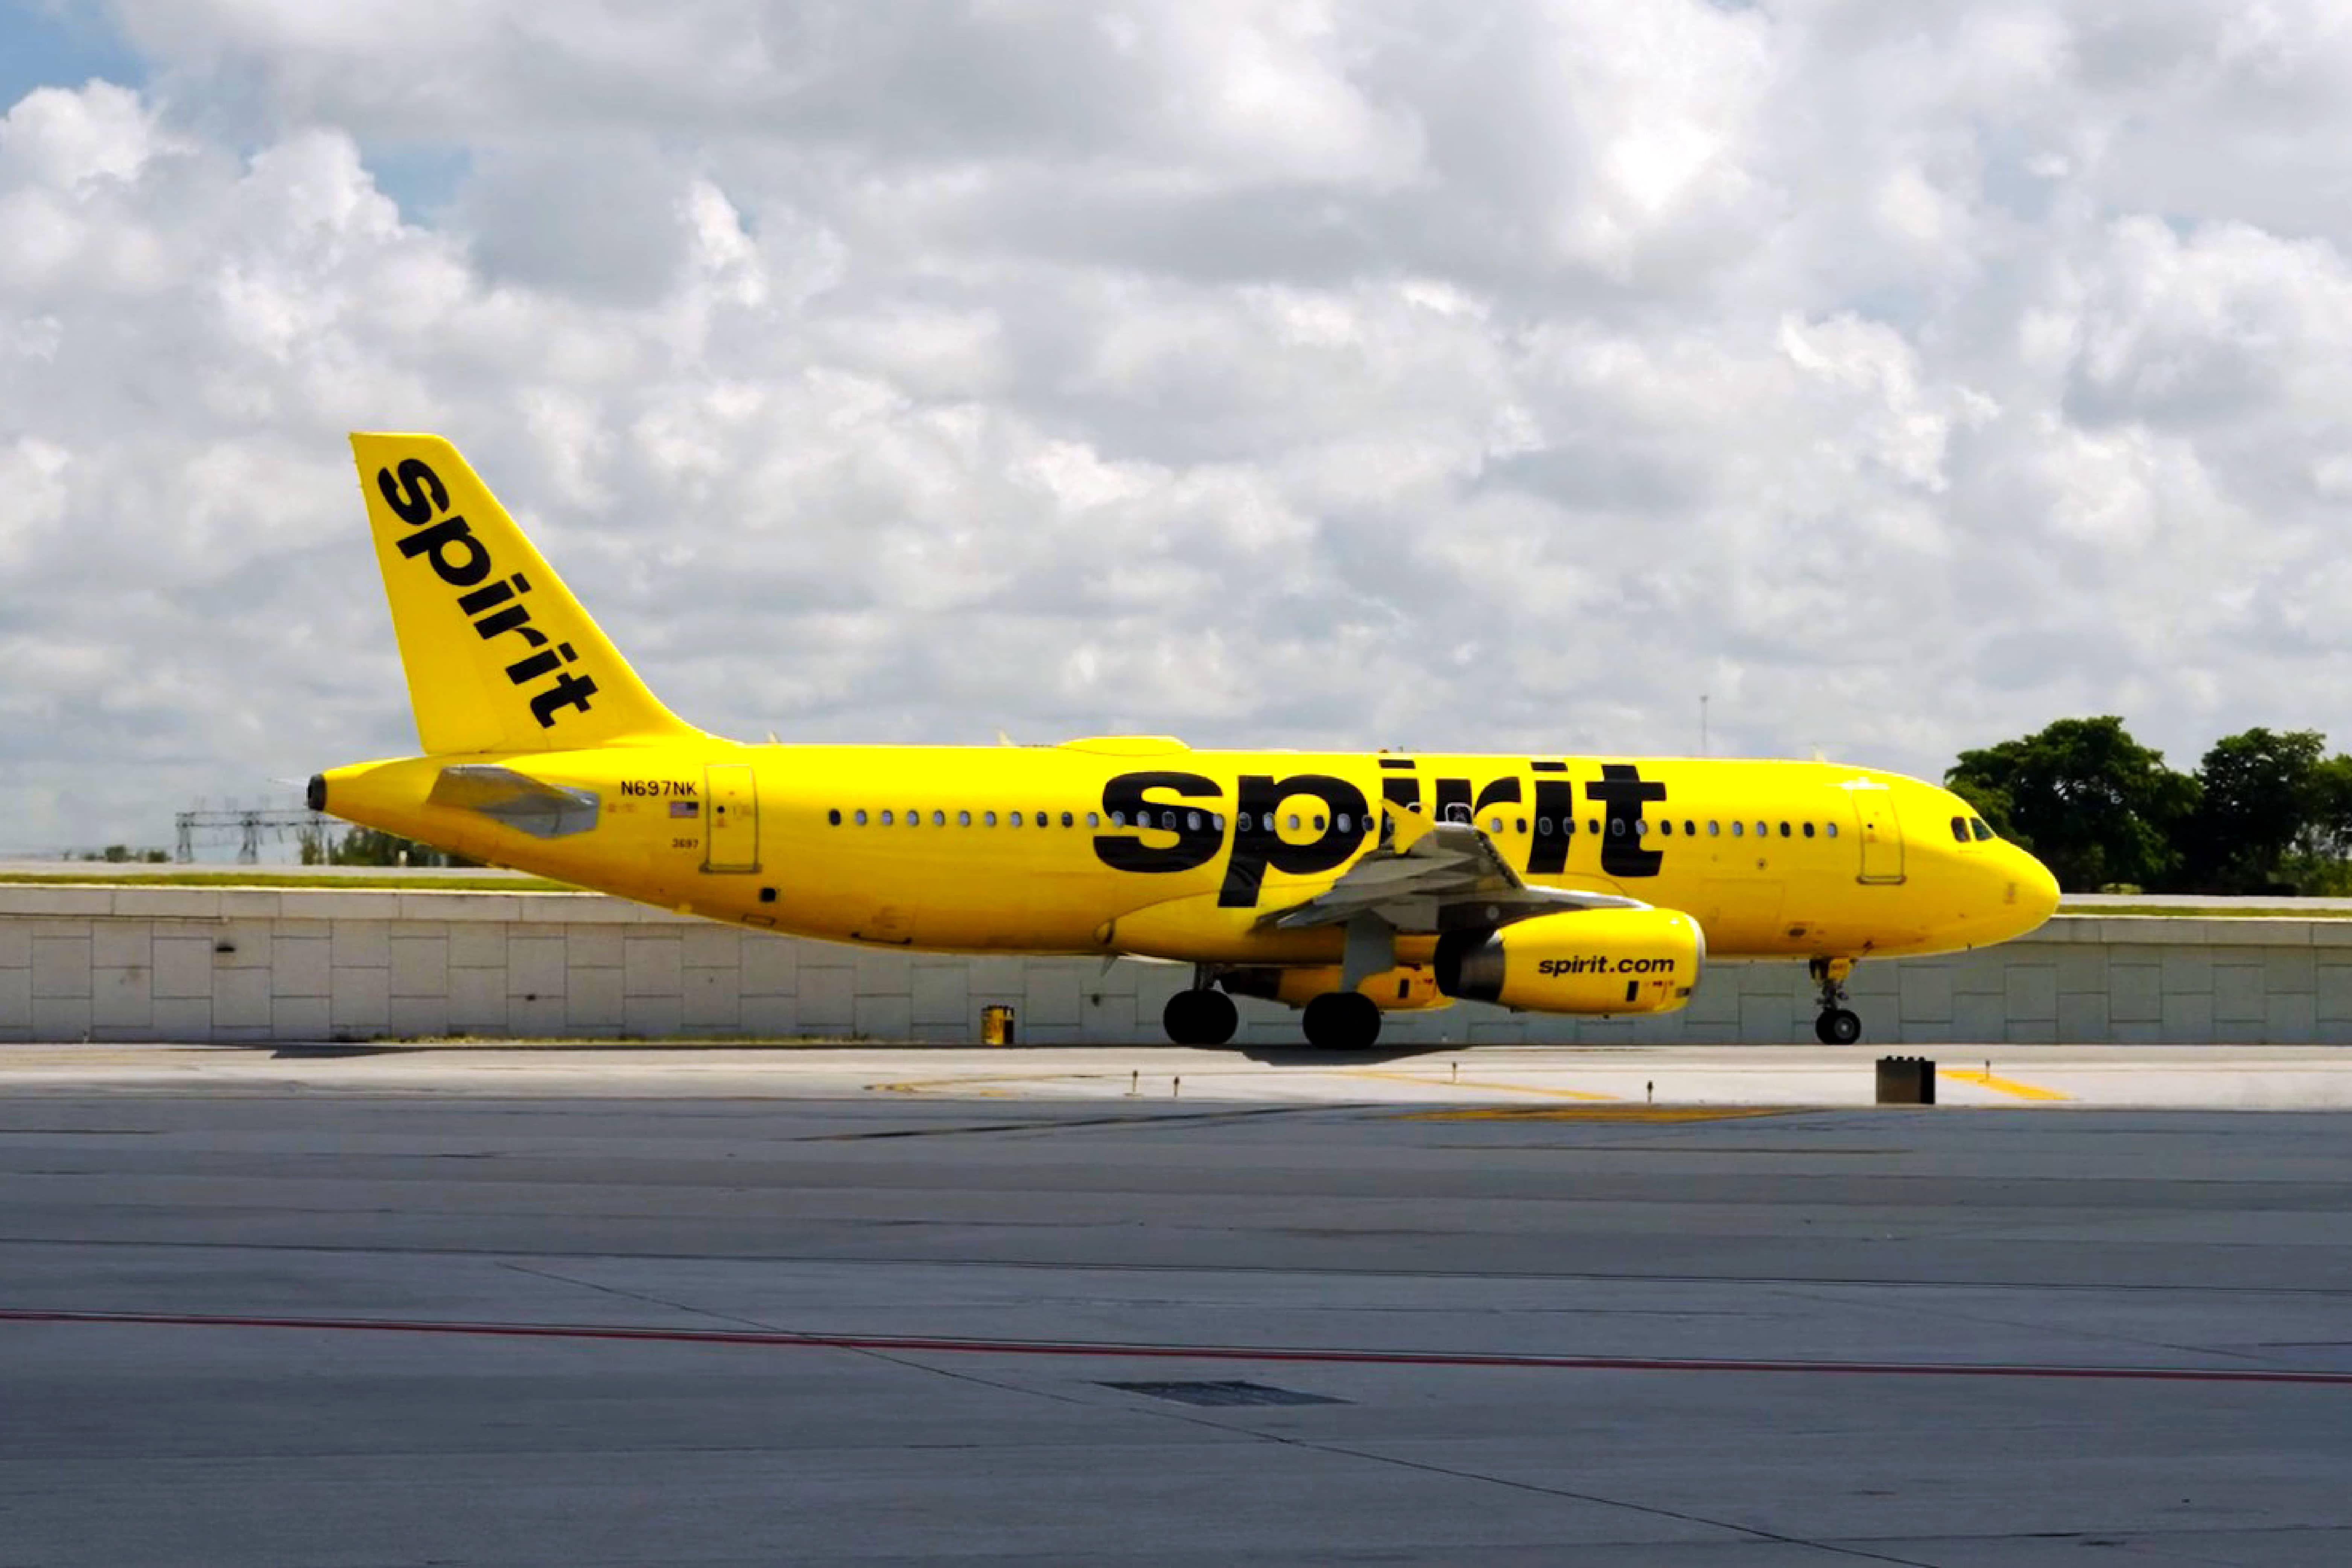 Spirit Airlines looking to hire 200+ flight attendants in Southern  California hiring event